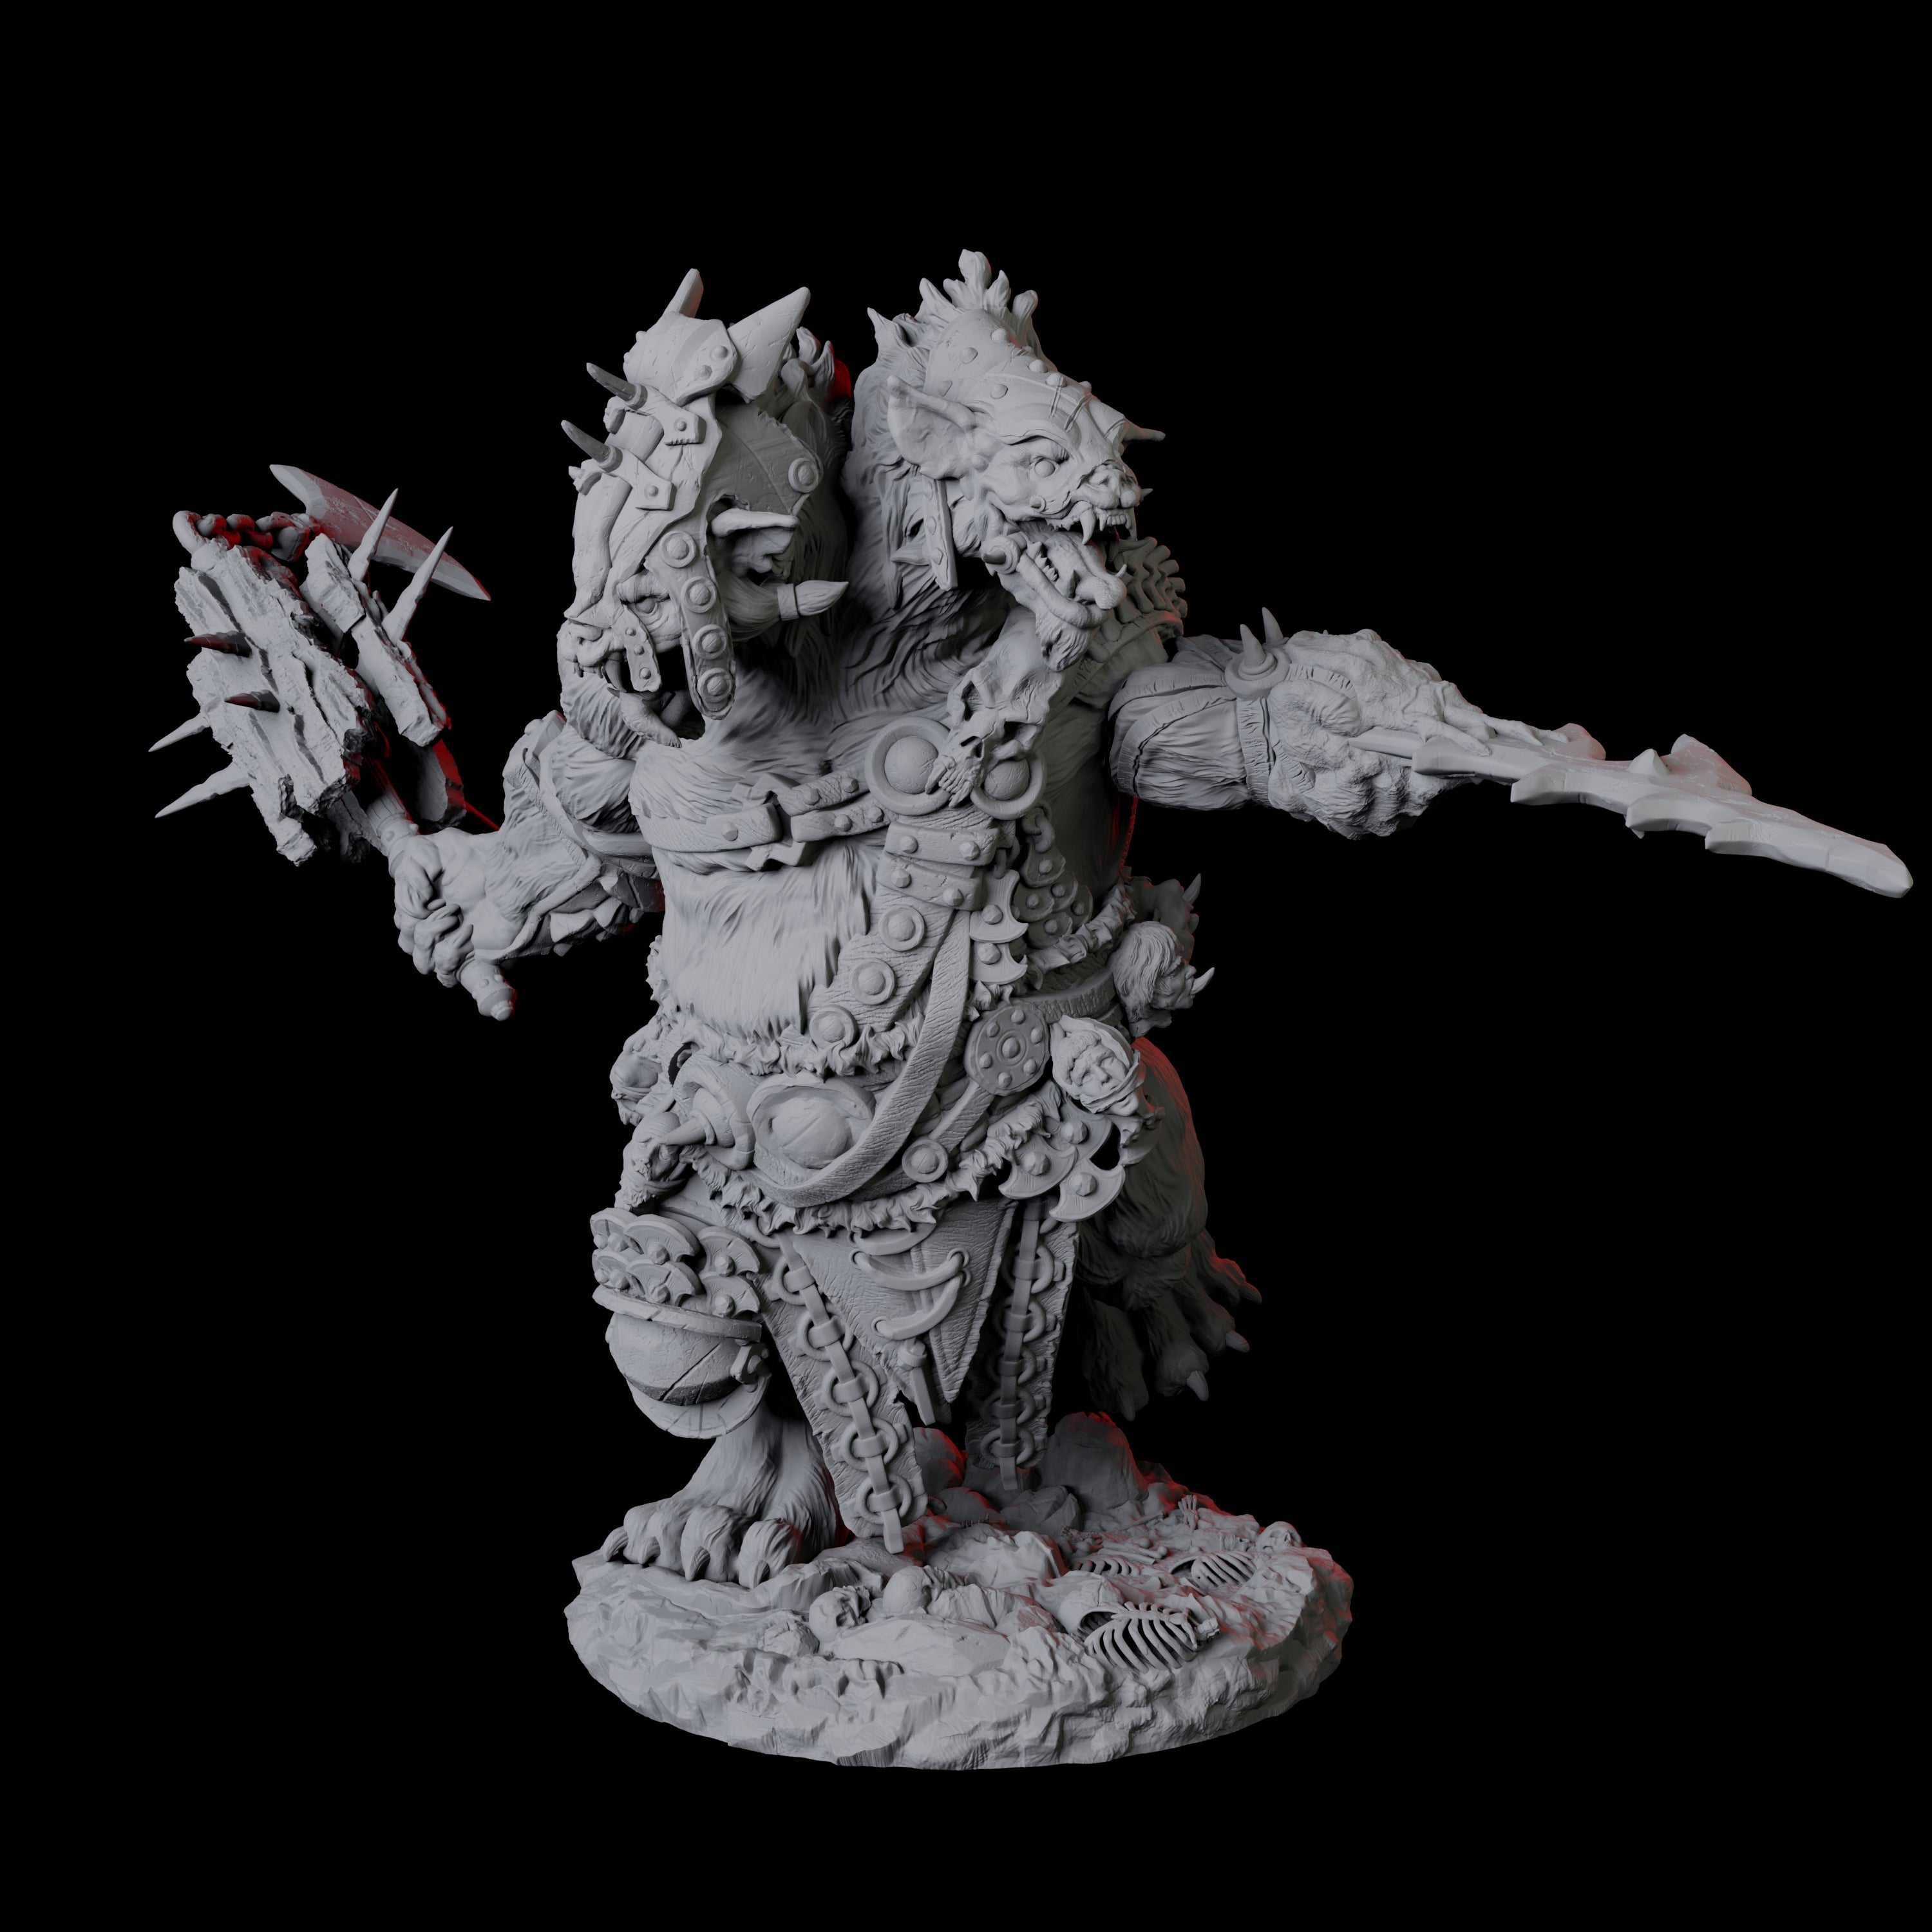 Two Gnoll Ettins Miniature for Dungeons and Dragons, Pathfinder or other TTRPGs